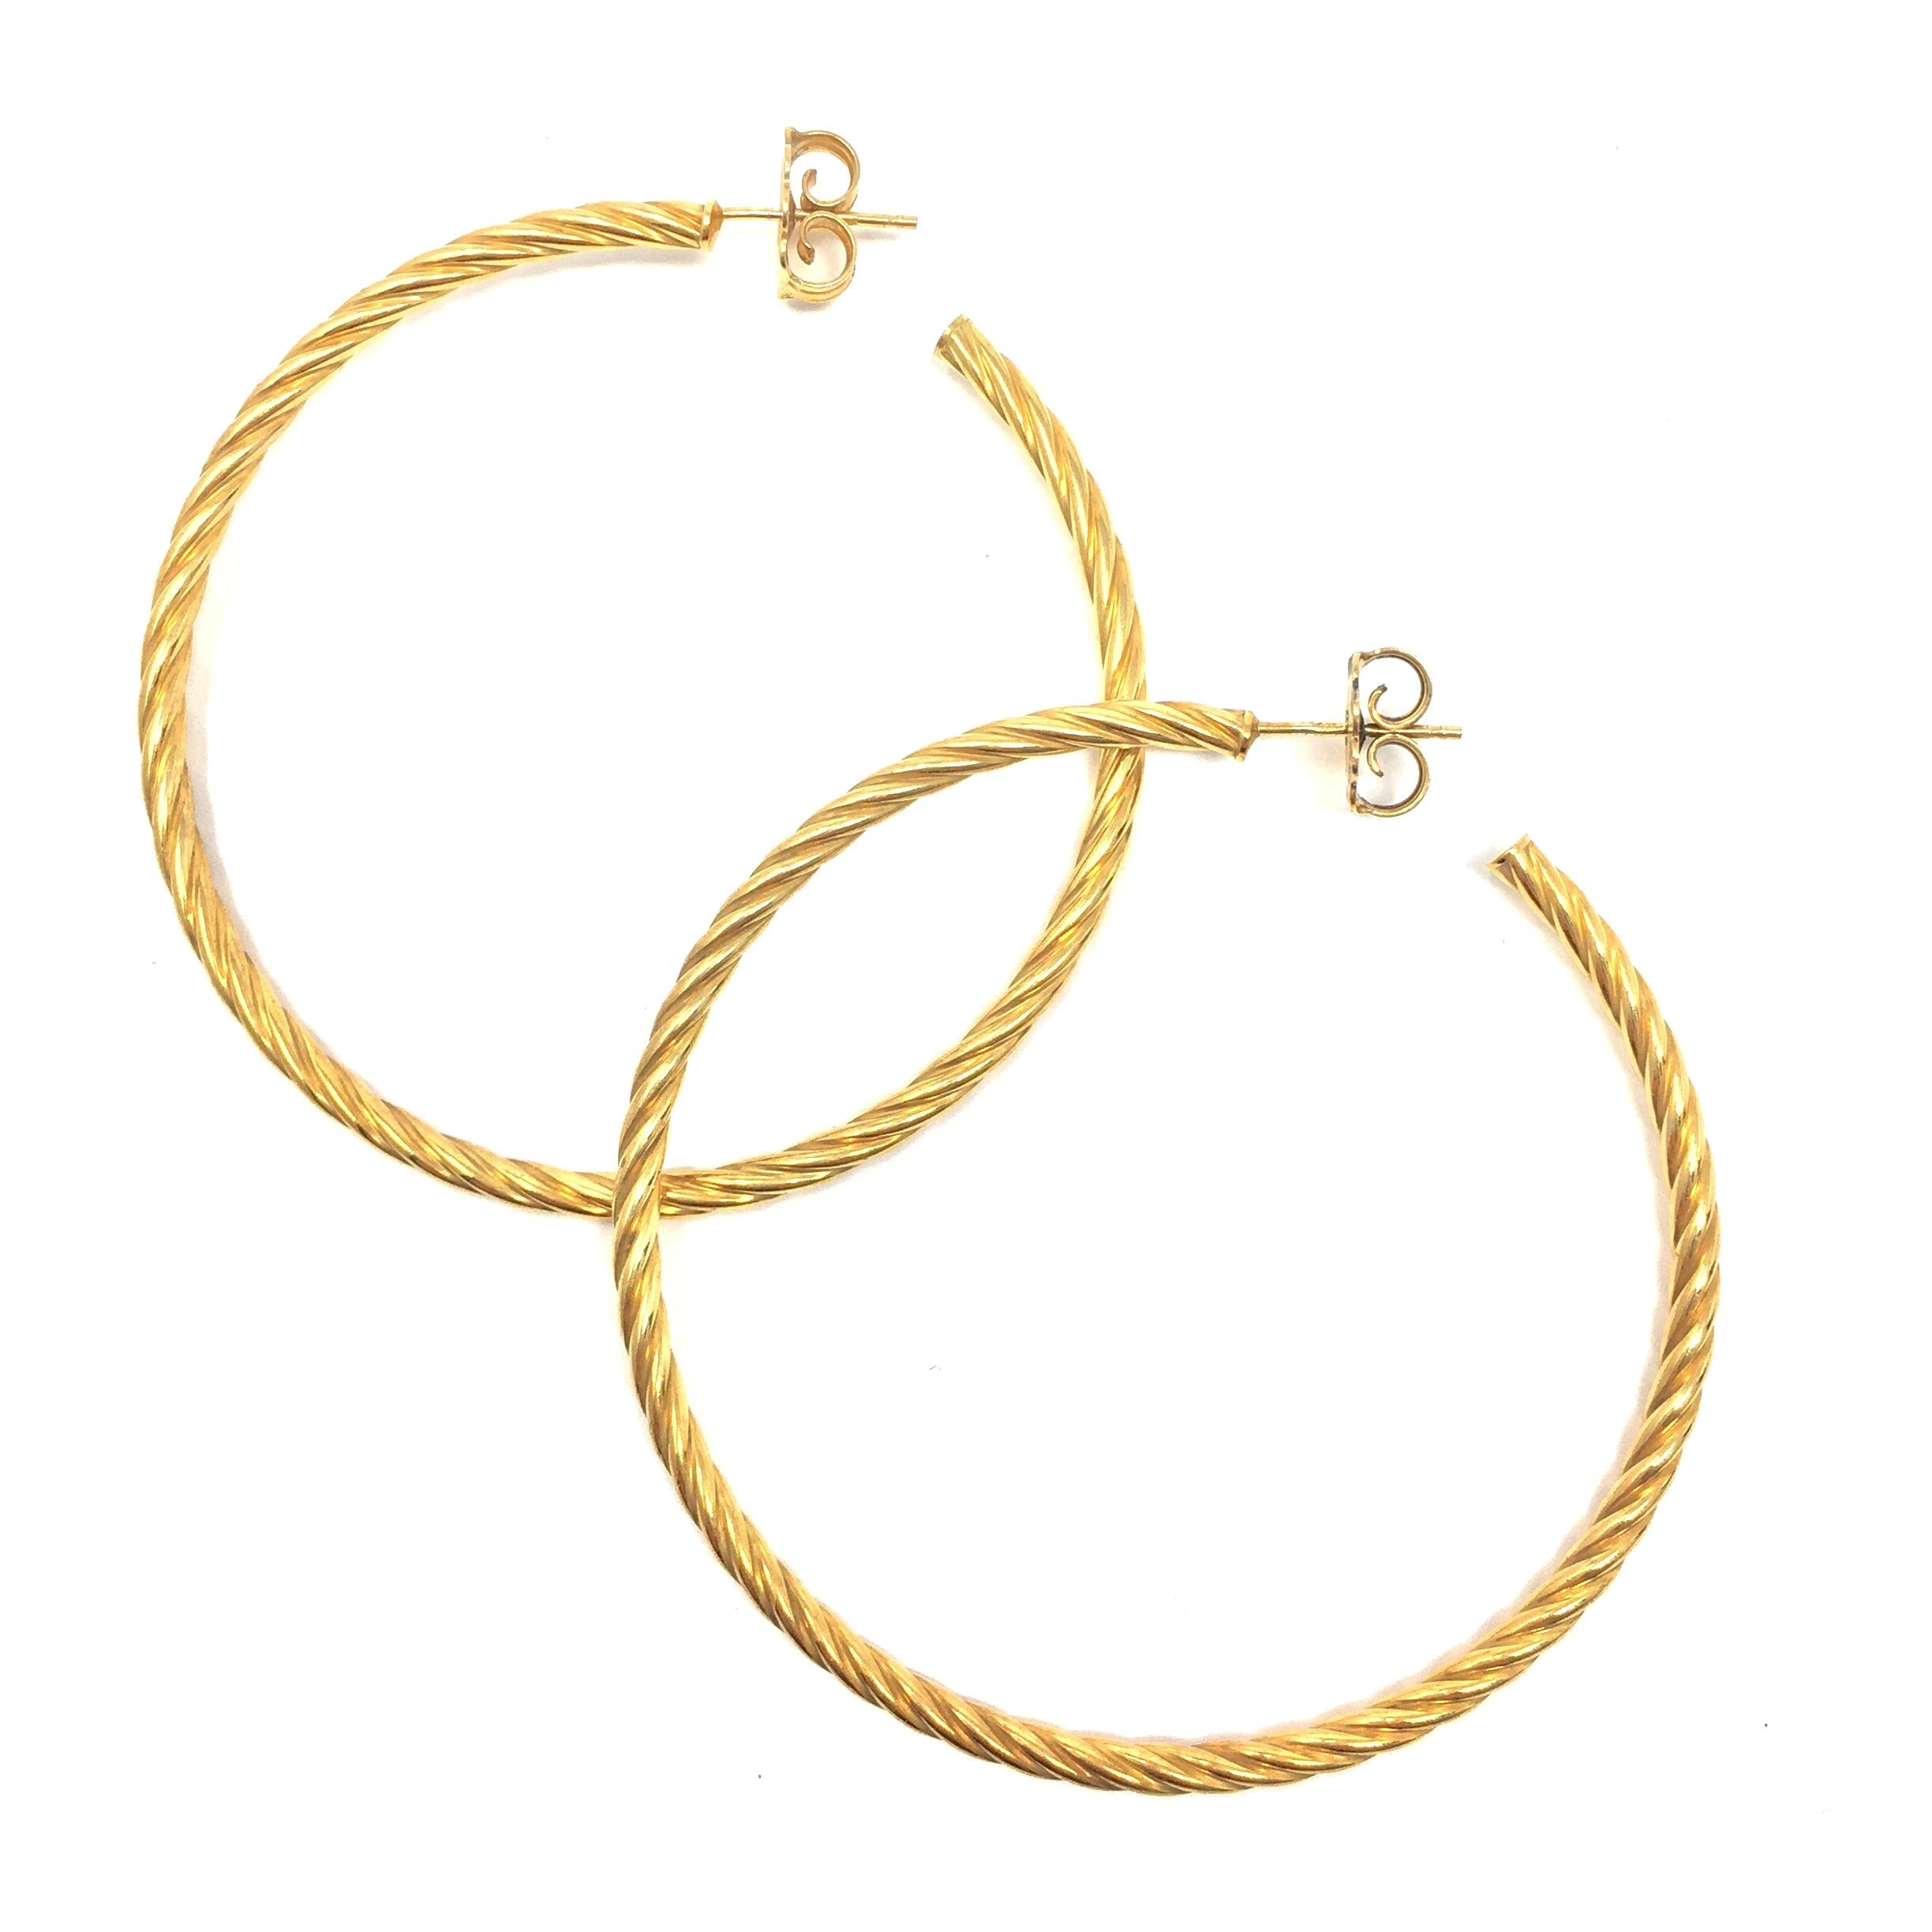 Discover more than 139 large 24k gold hoop earrings